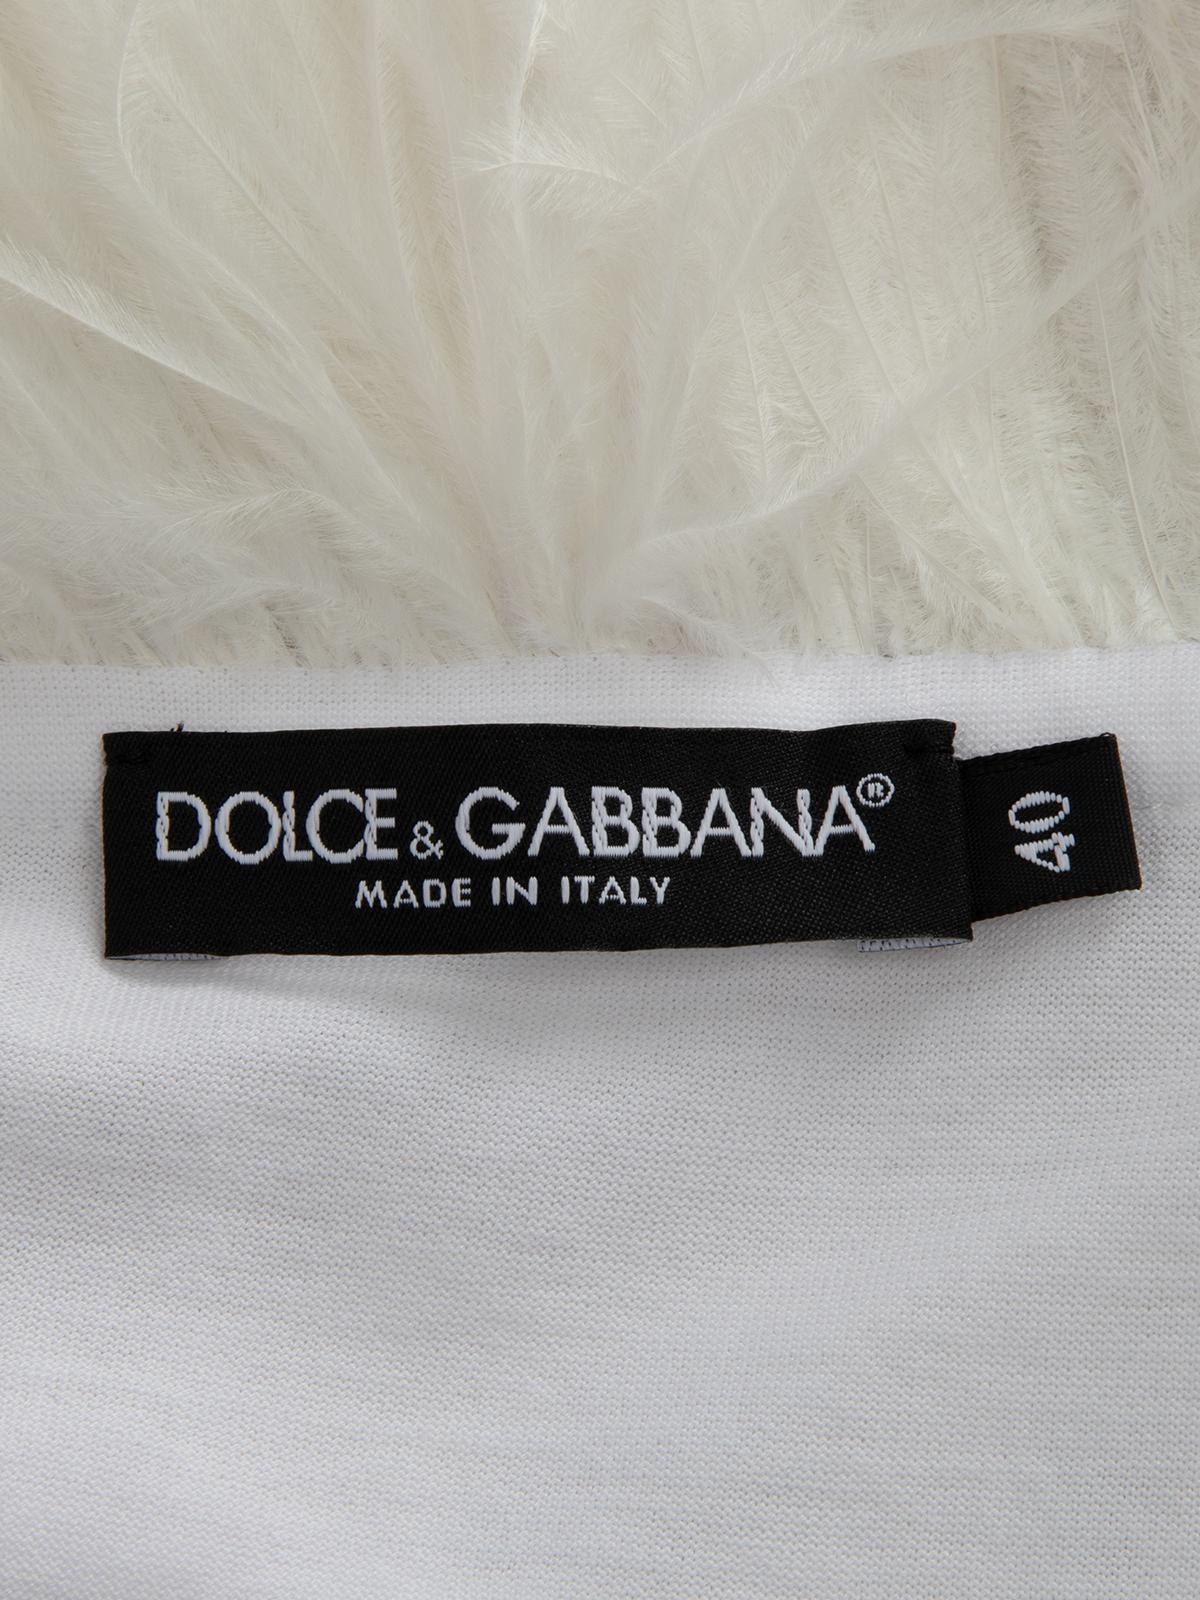 Pre-Loved Dolce & Gabbana Women's Top with Feathers 2